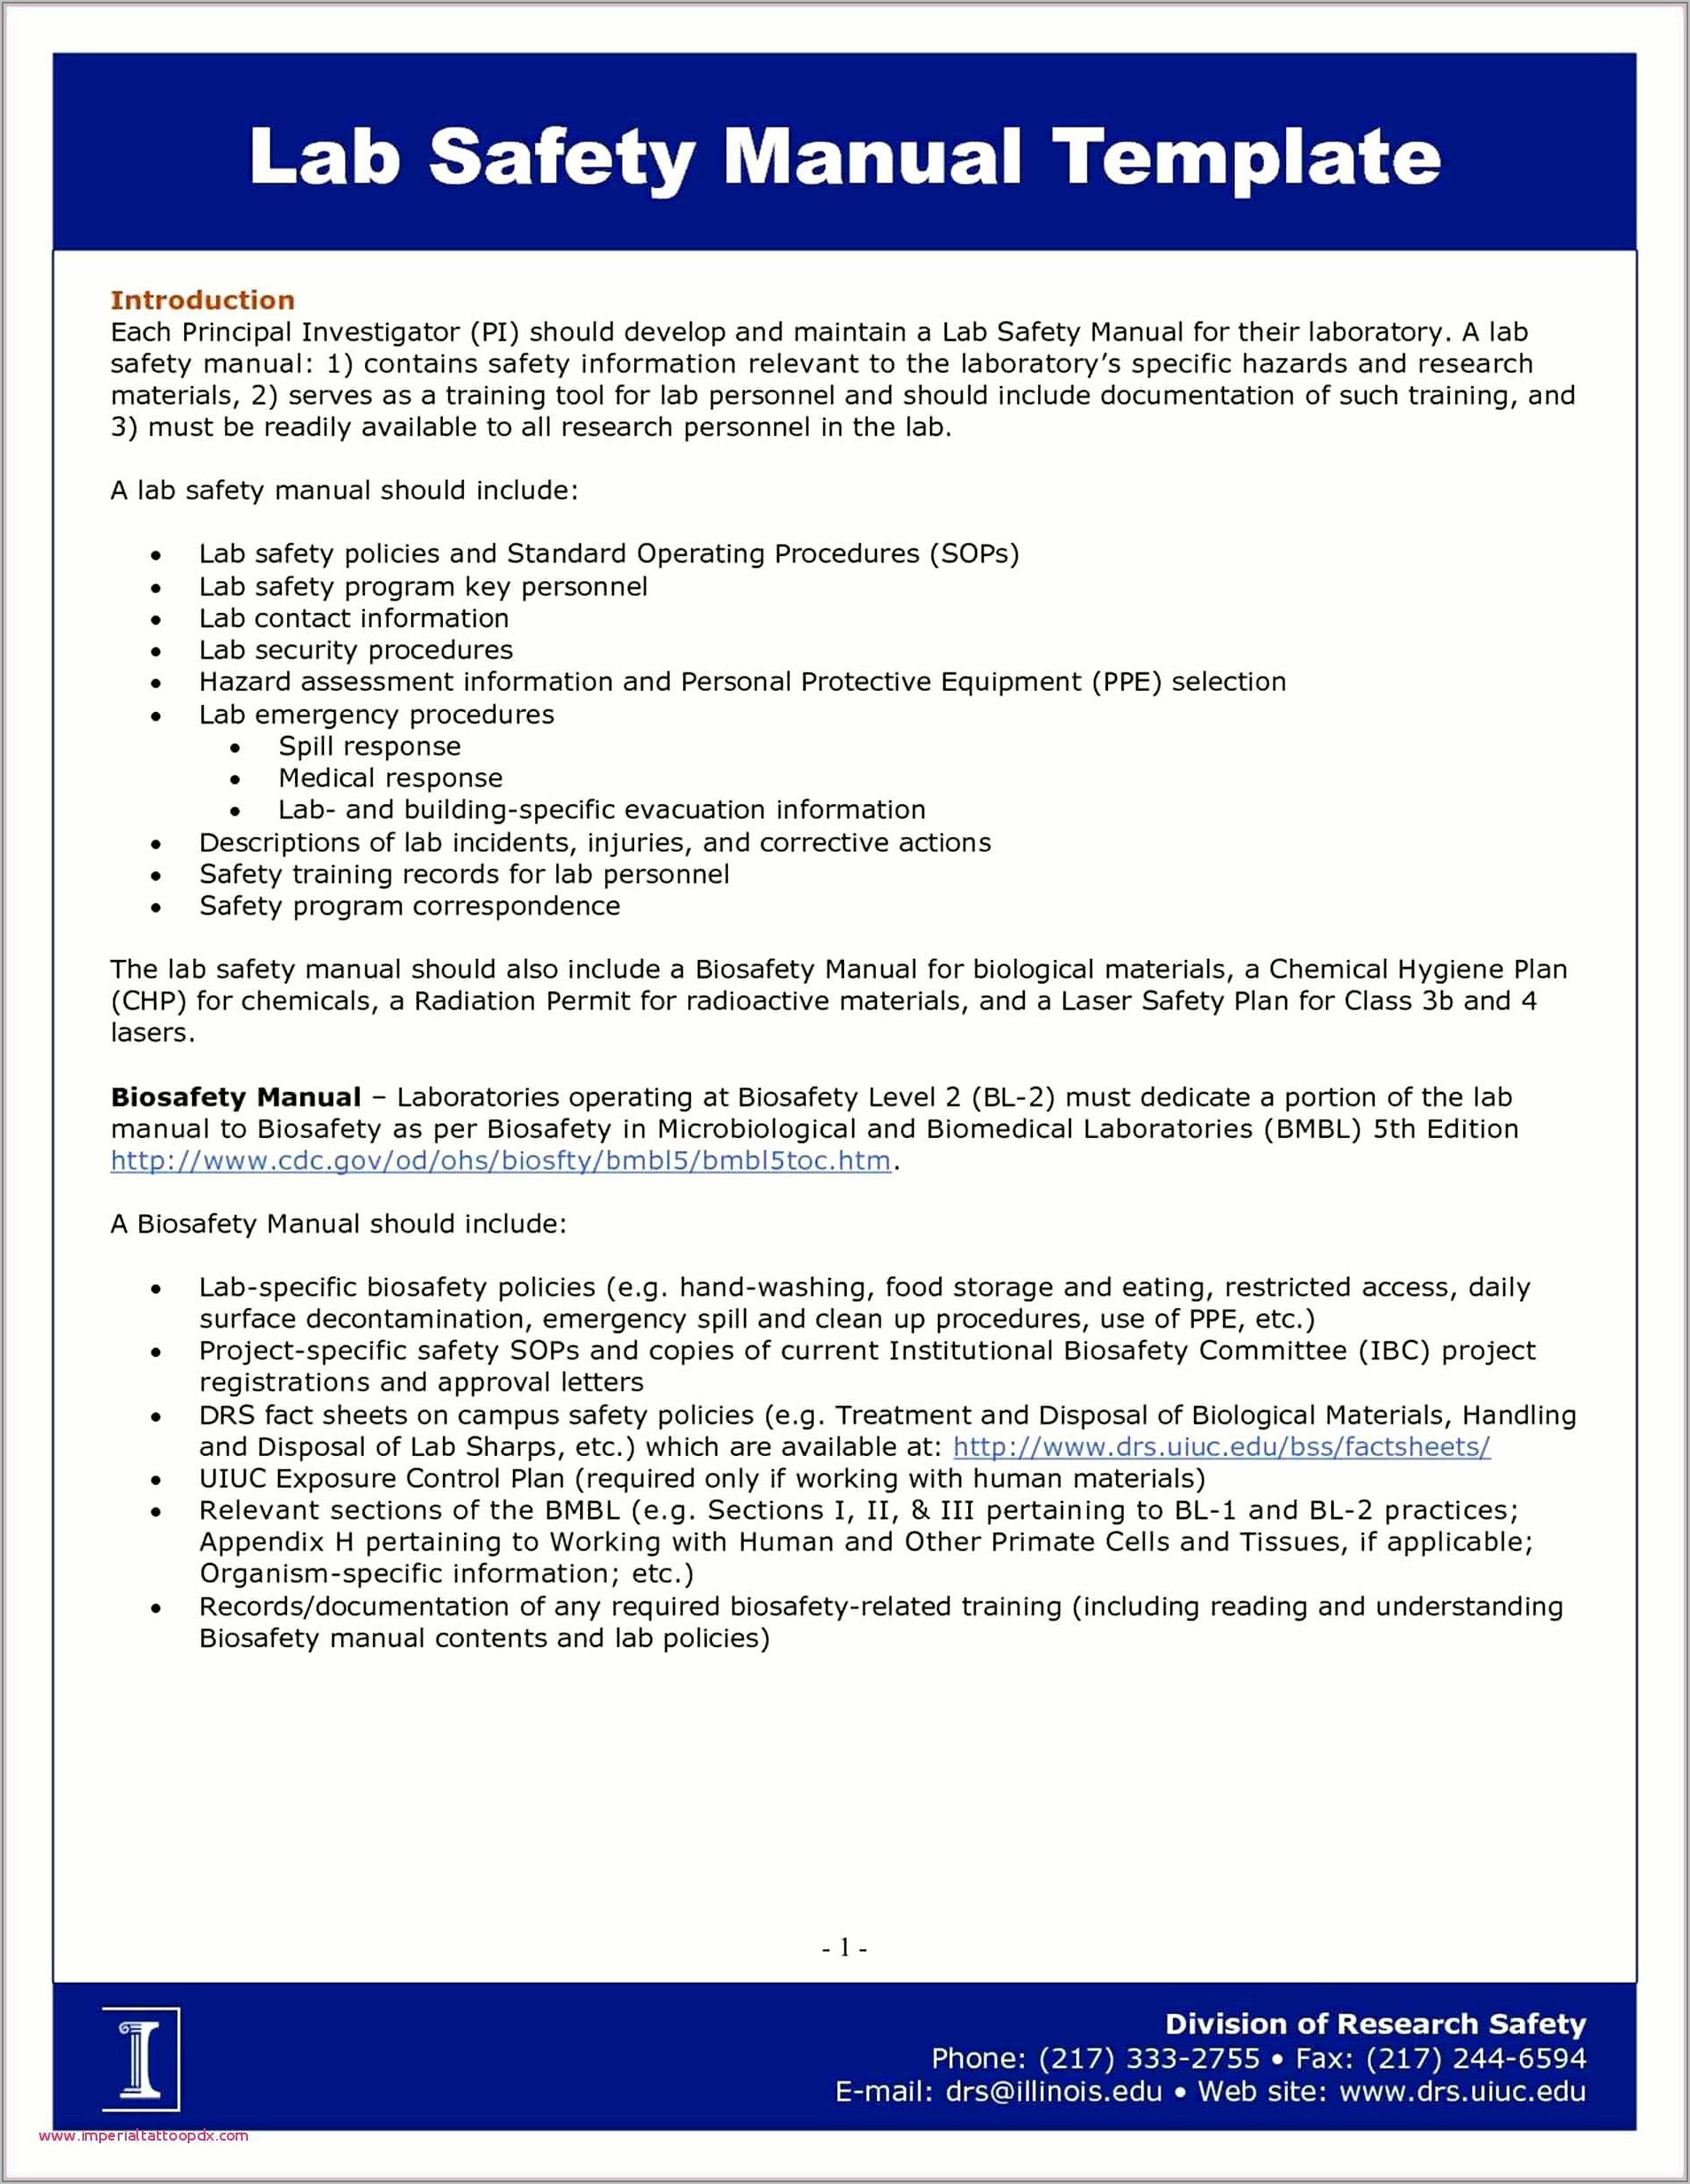 General Resume Objective Examples For Security Guard